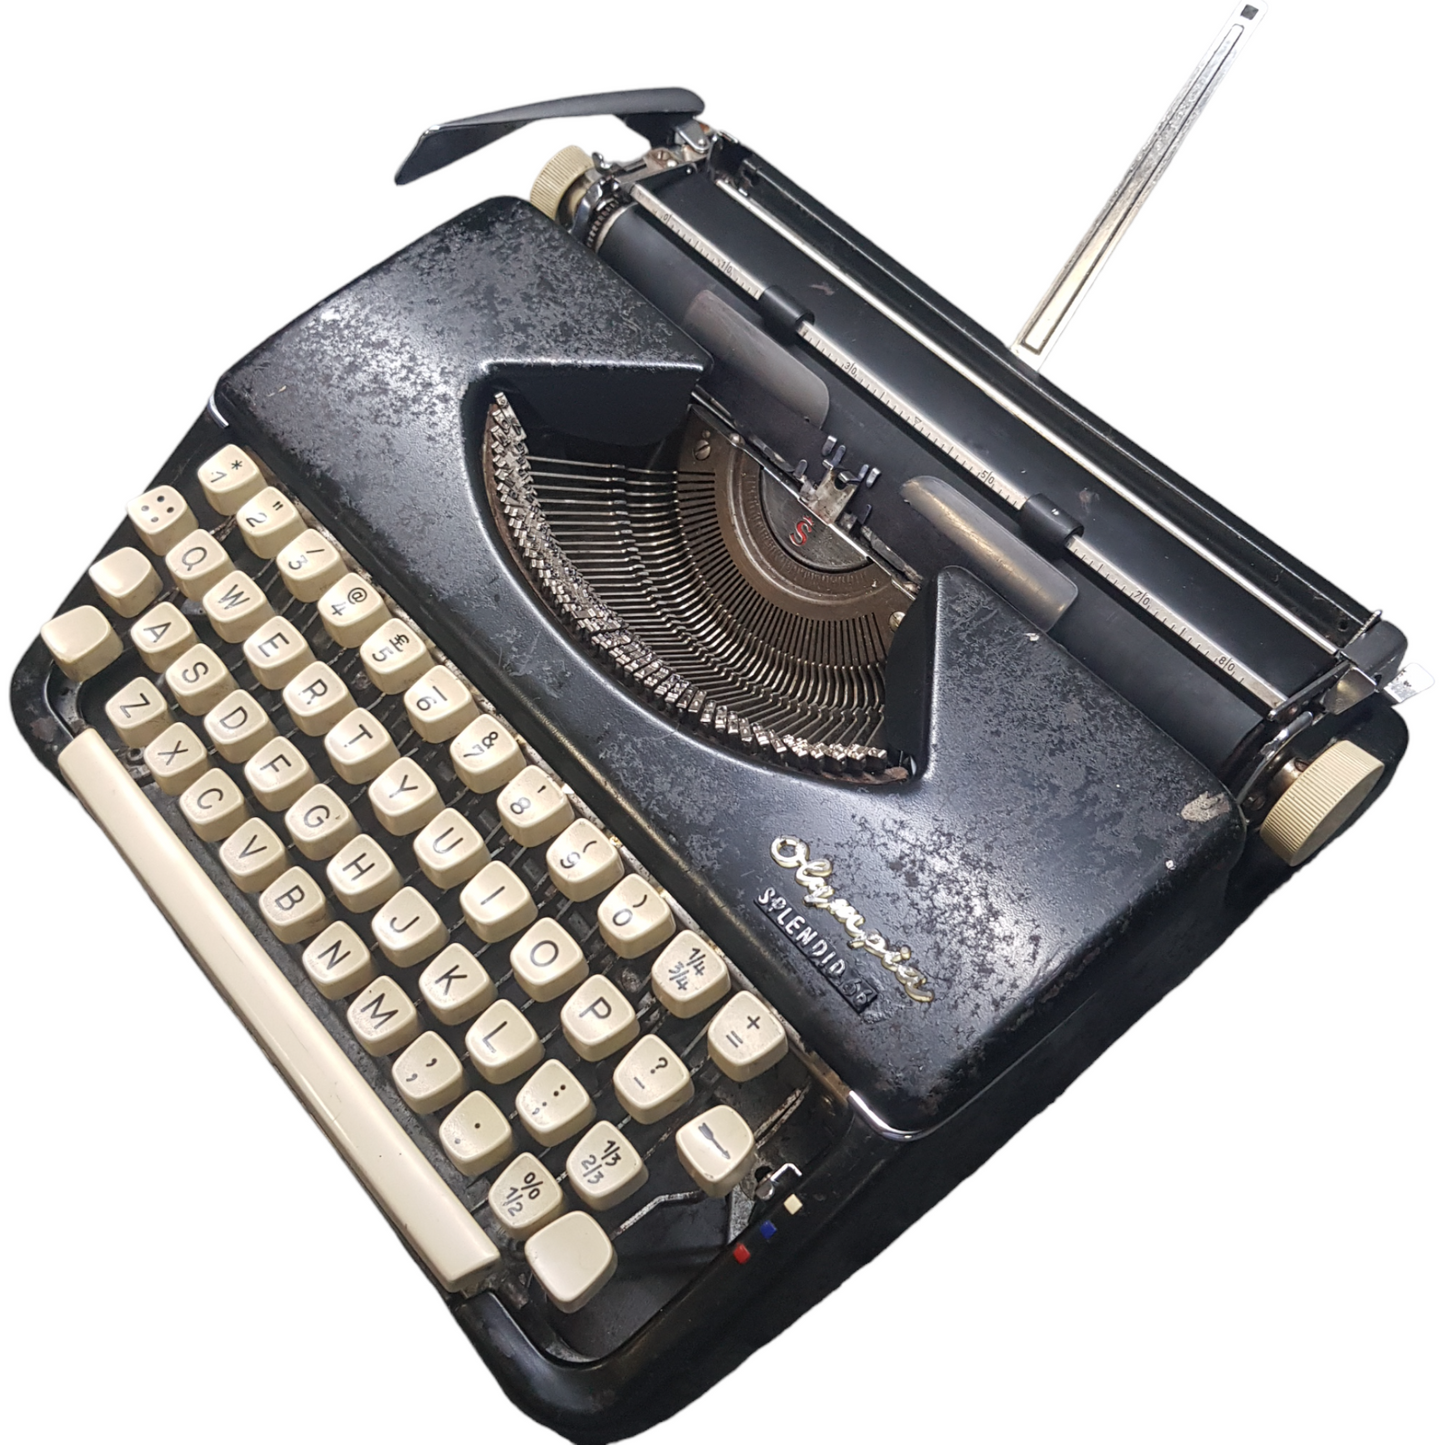 Image of Olympia Splendid Portable Typewriter. Almost smallest portable typewriter. Made in Germany. Available from universaltypewritercompany.in.